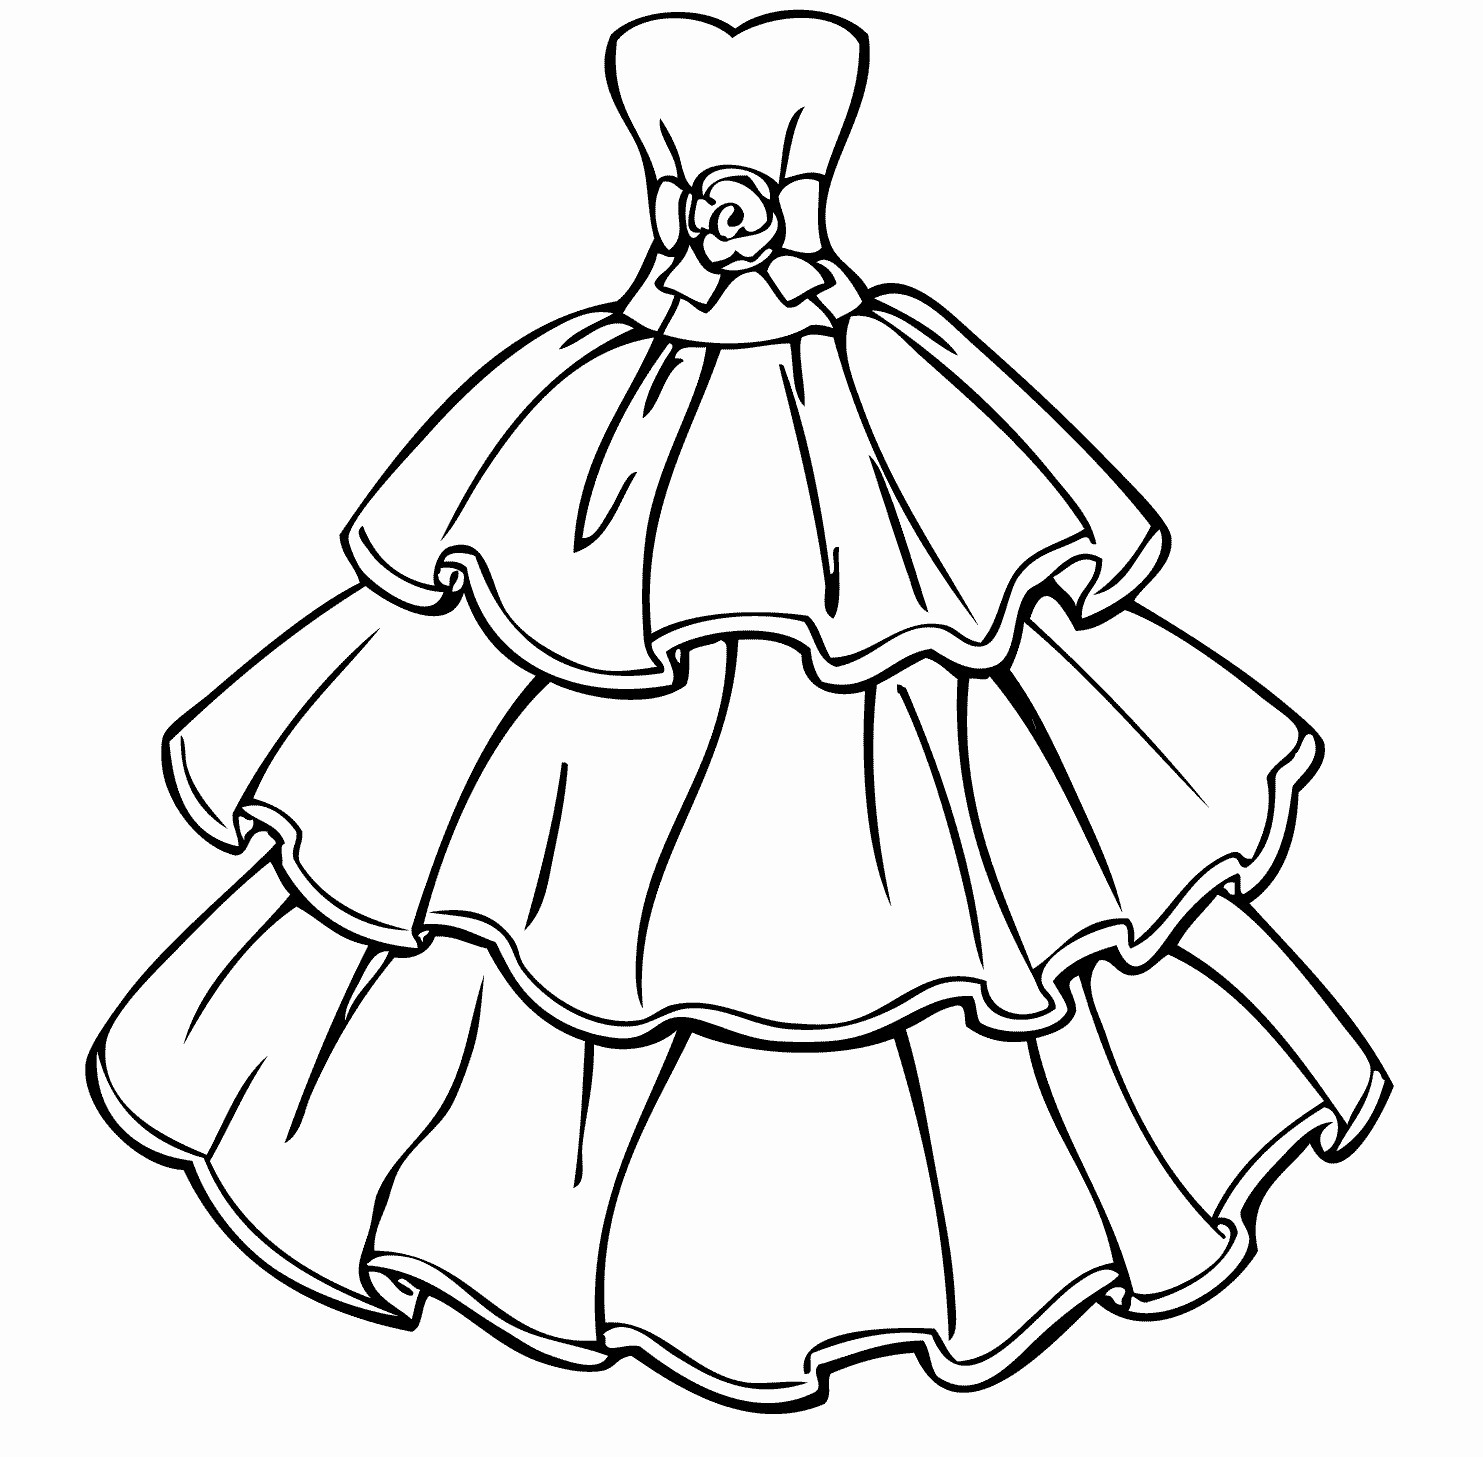 Dress Sketch Template at PaintingValley.com | Explore collection of ...